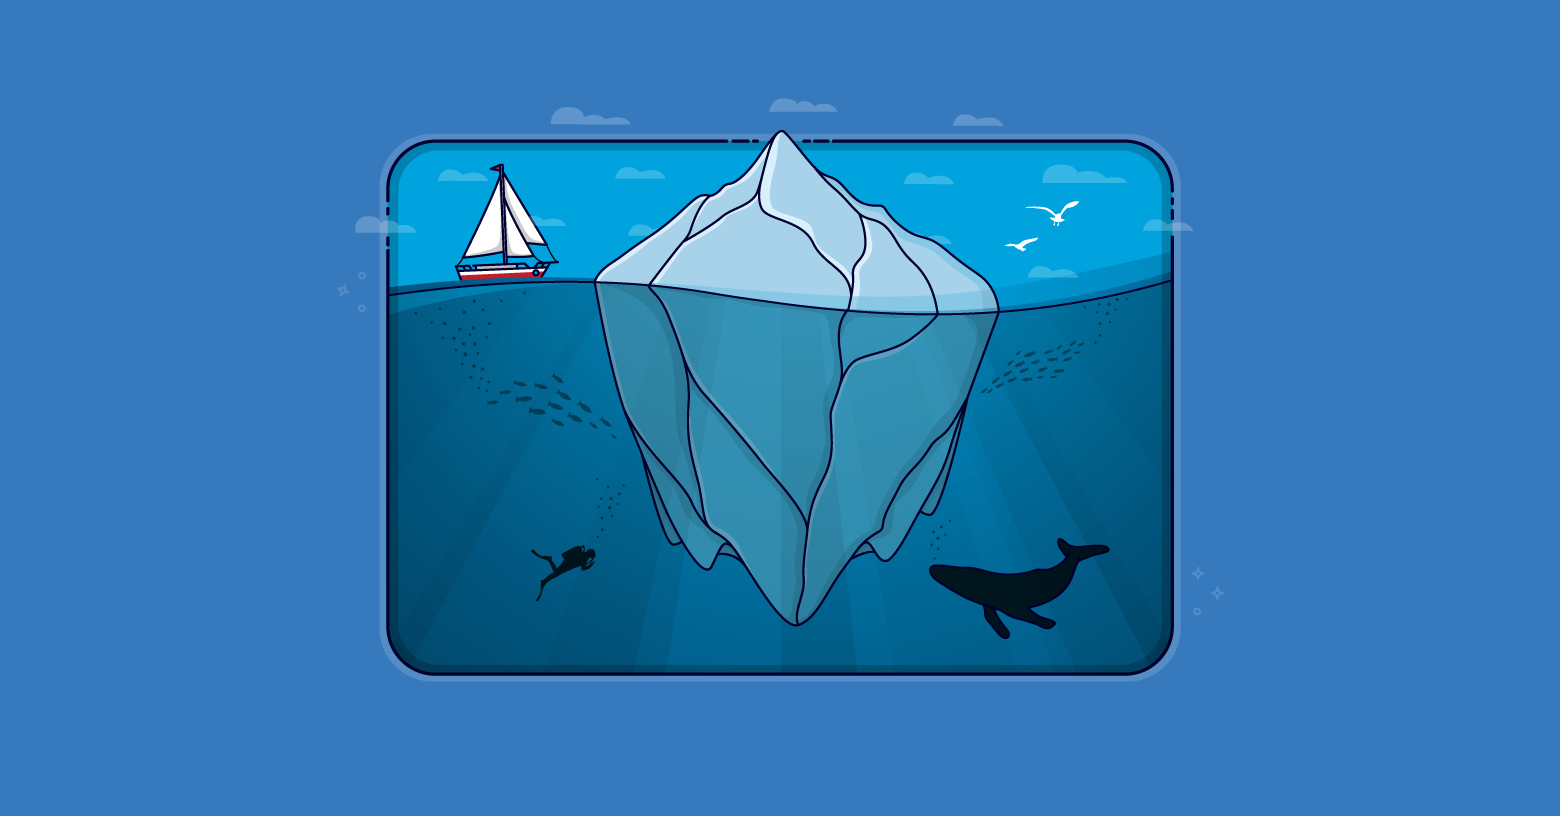 Why Your Product Backlog Should Look Like an Iceberg